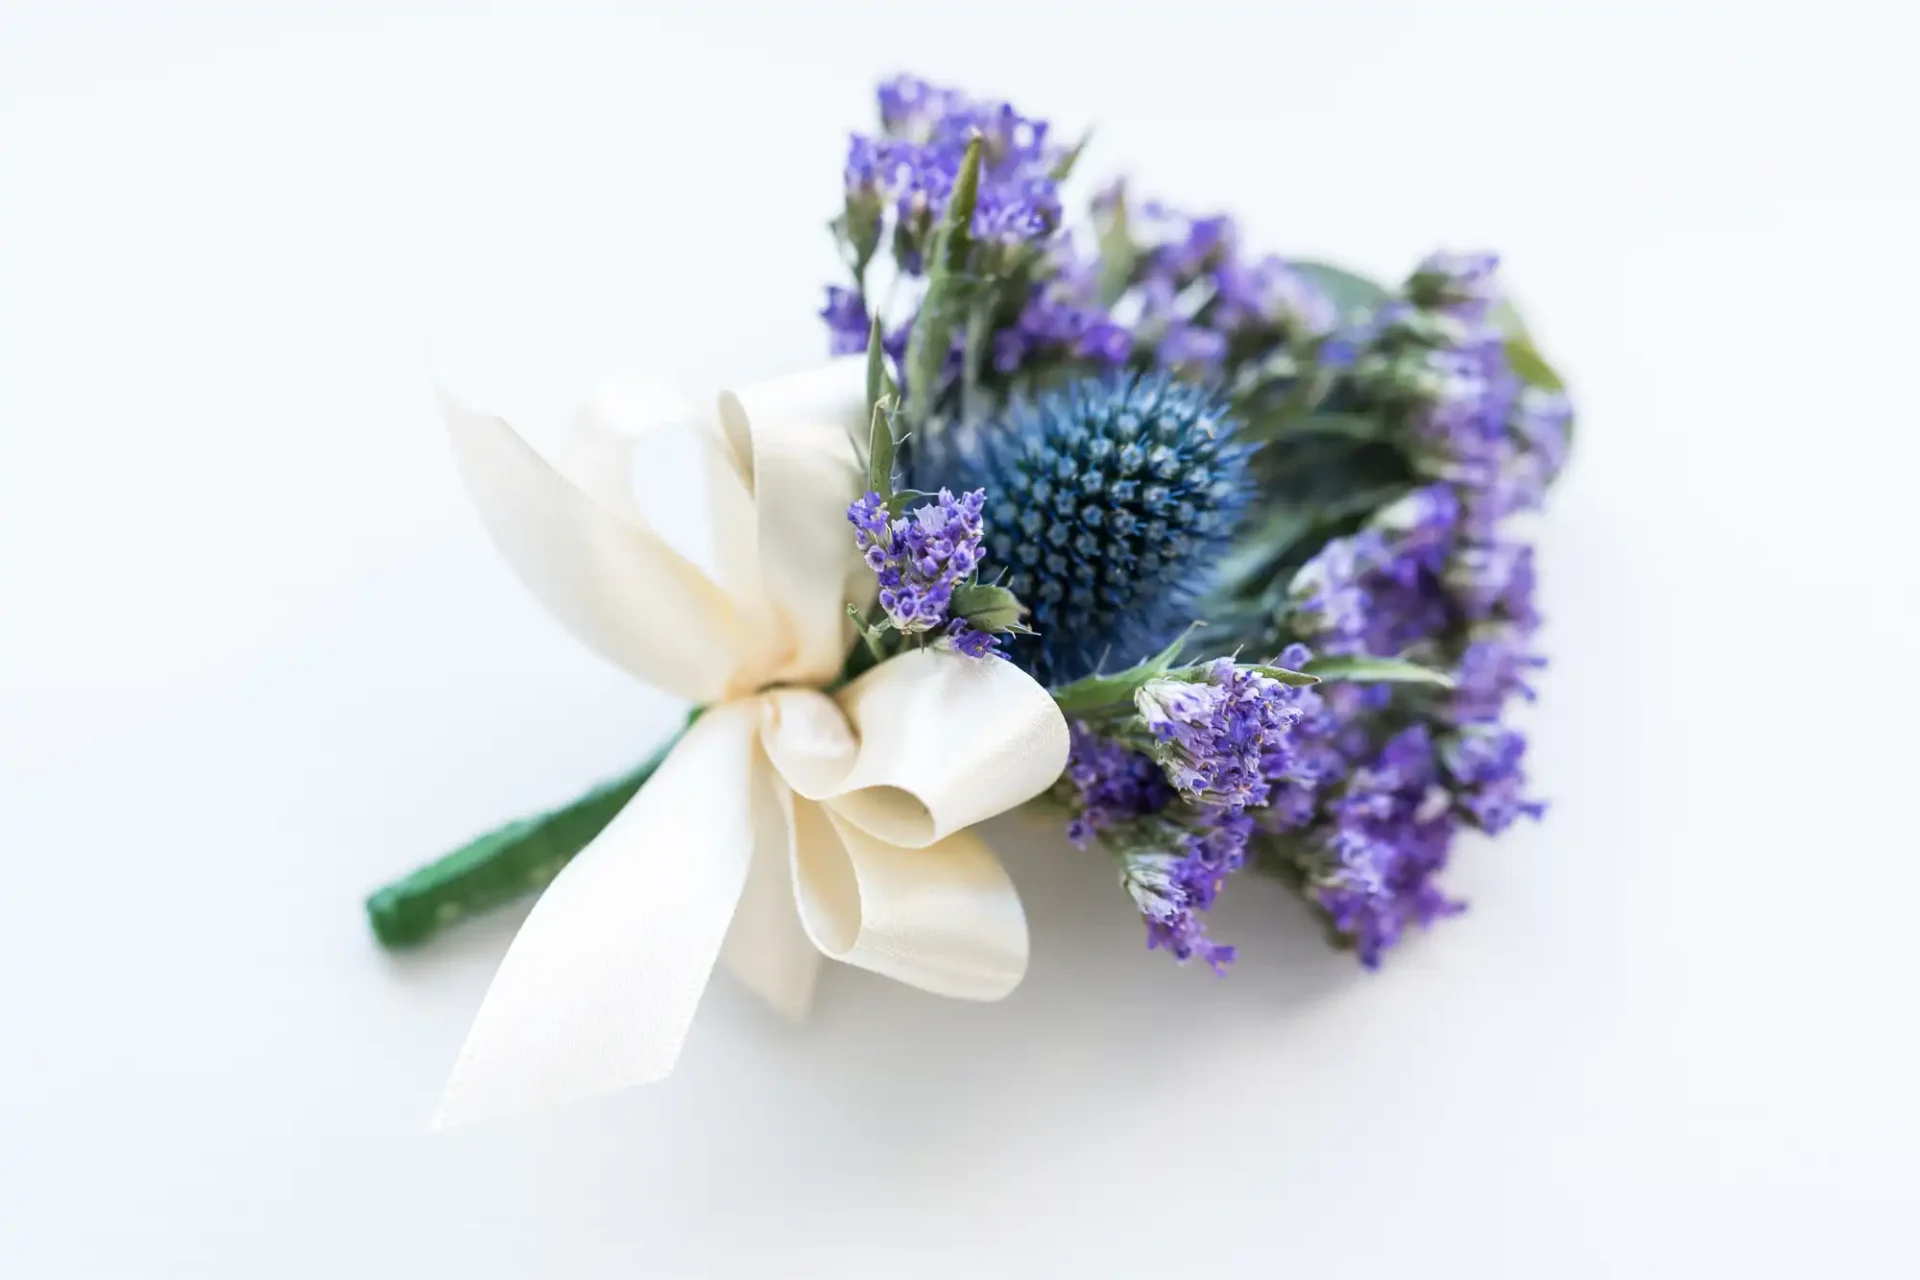 A delicate boutonniere featuring a blue thistle and purple flowers, accented with a large white ribbon, against a white background.